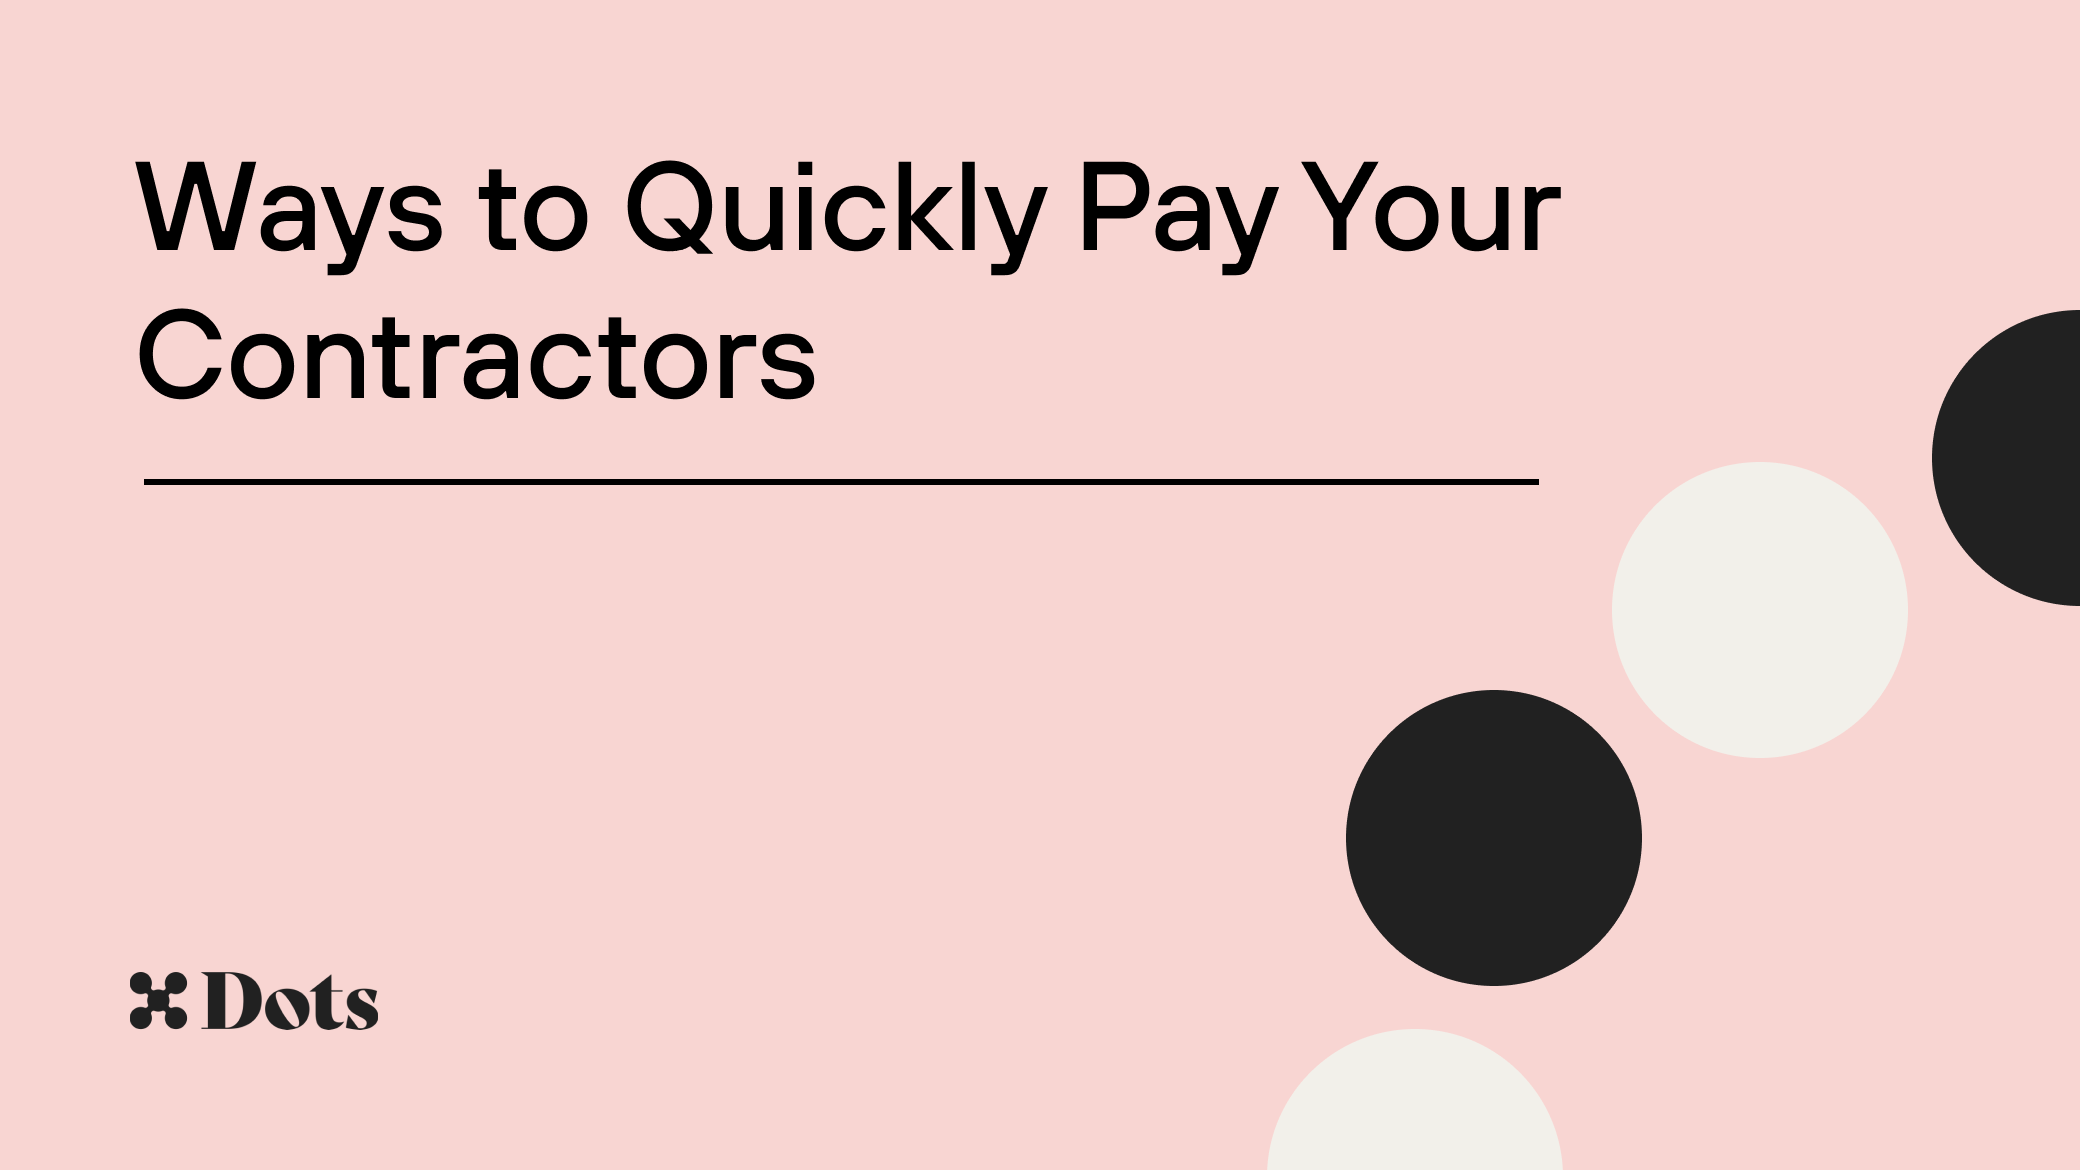 Ways to Quickly Pay Your Contractors - Dots